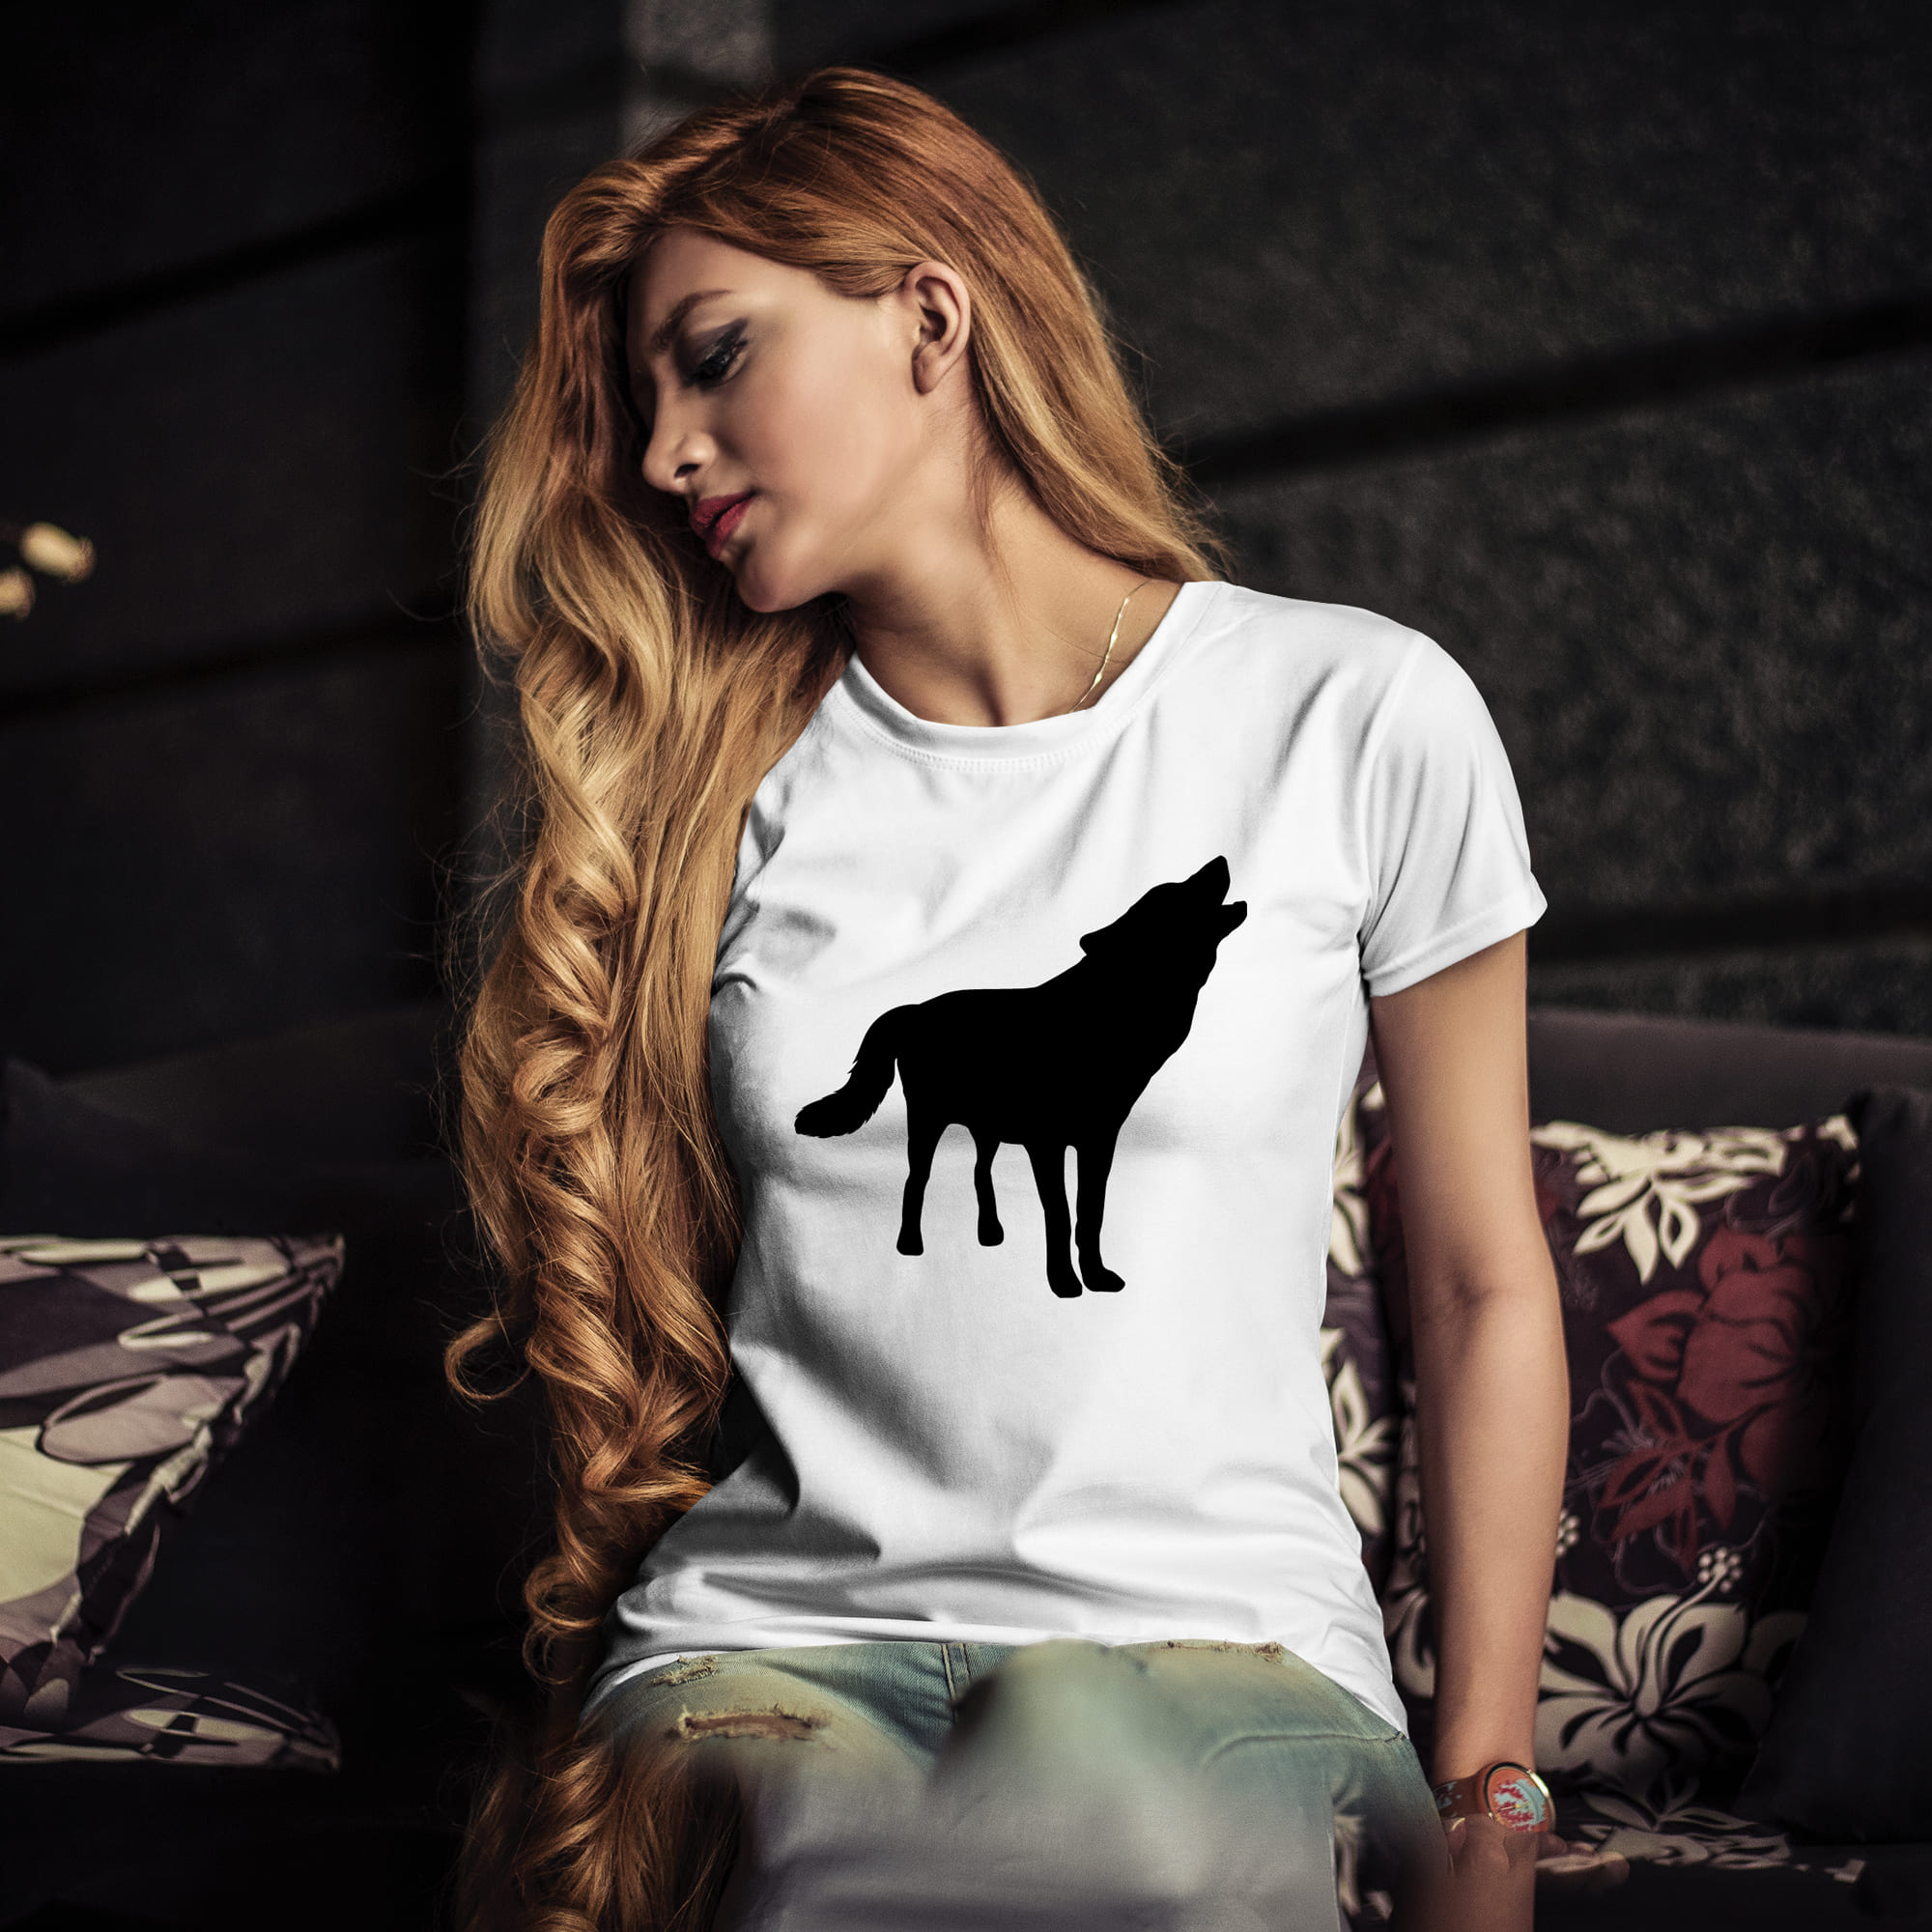 Woman sitting on a couch wearing a t - shirt with a wolf on it.